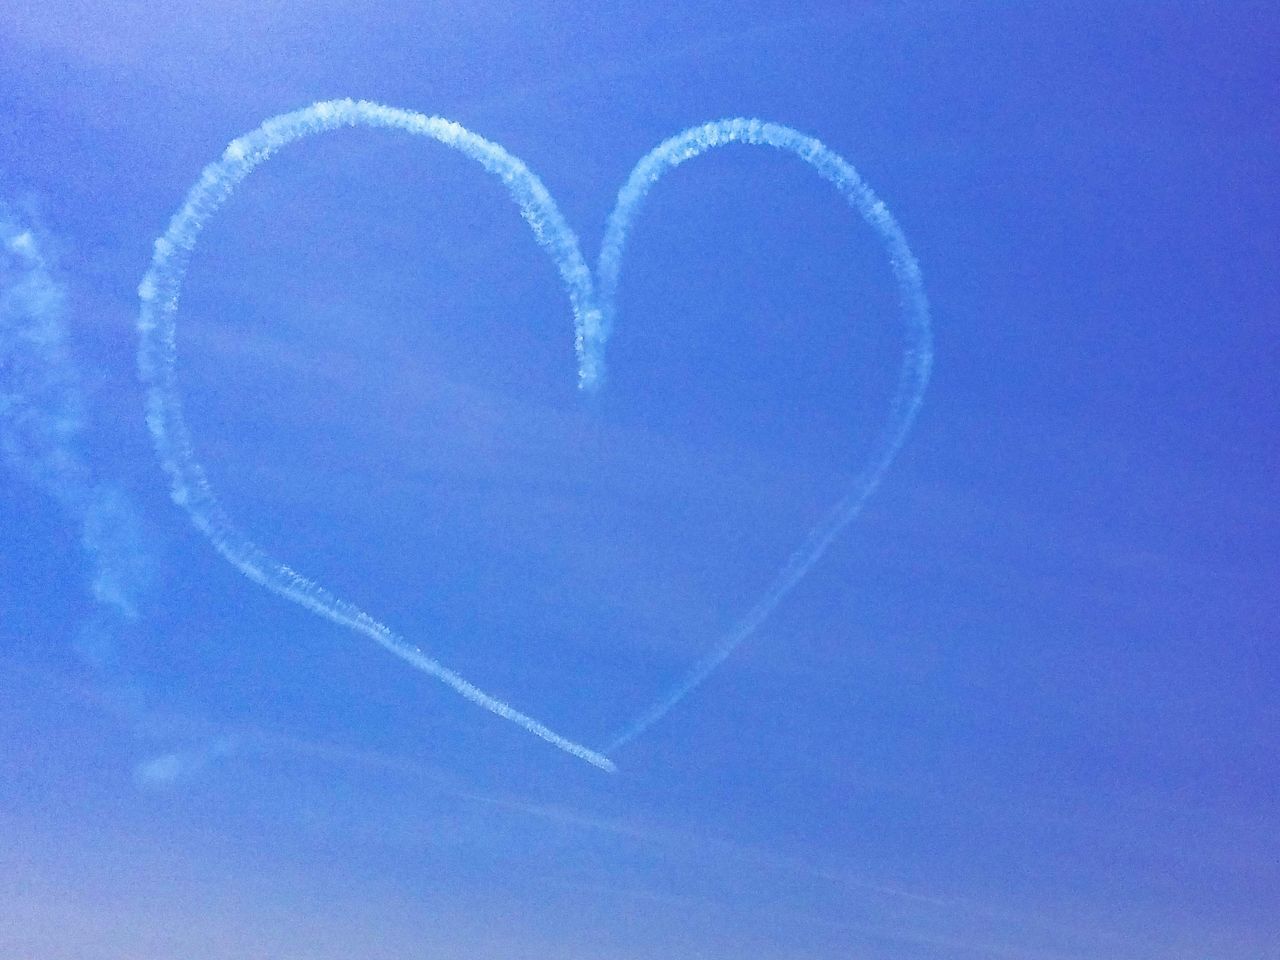 LOW ANGLE VIEW OF HEART SHAPE AGAINST SKY